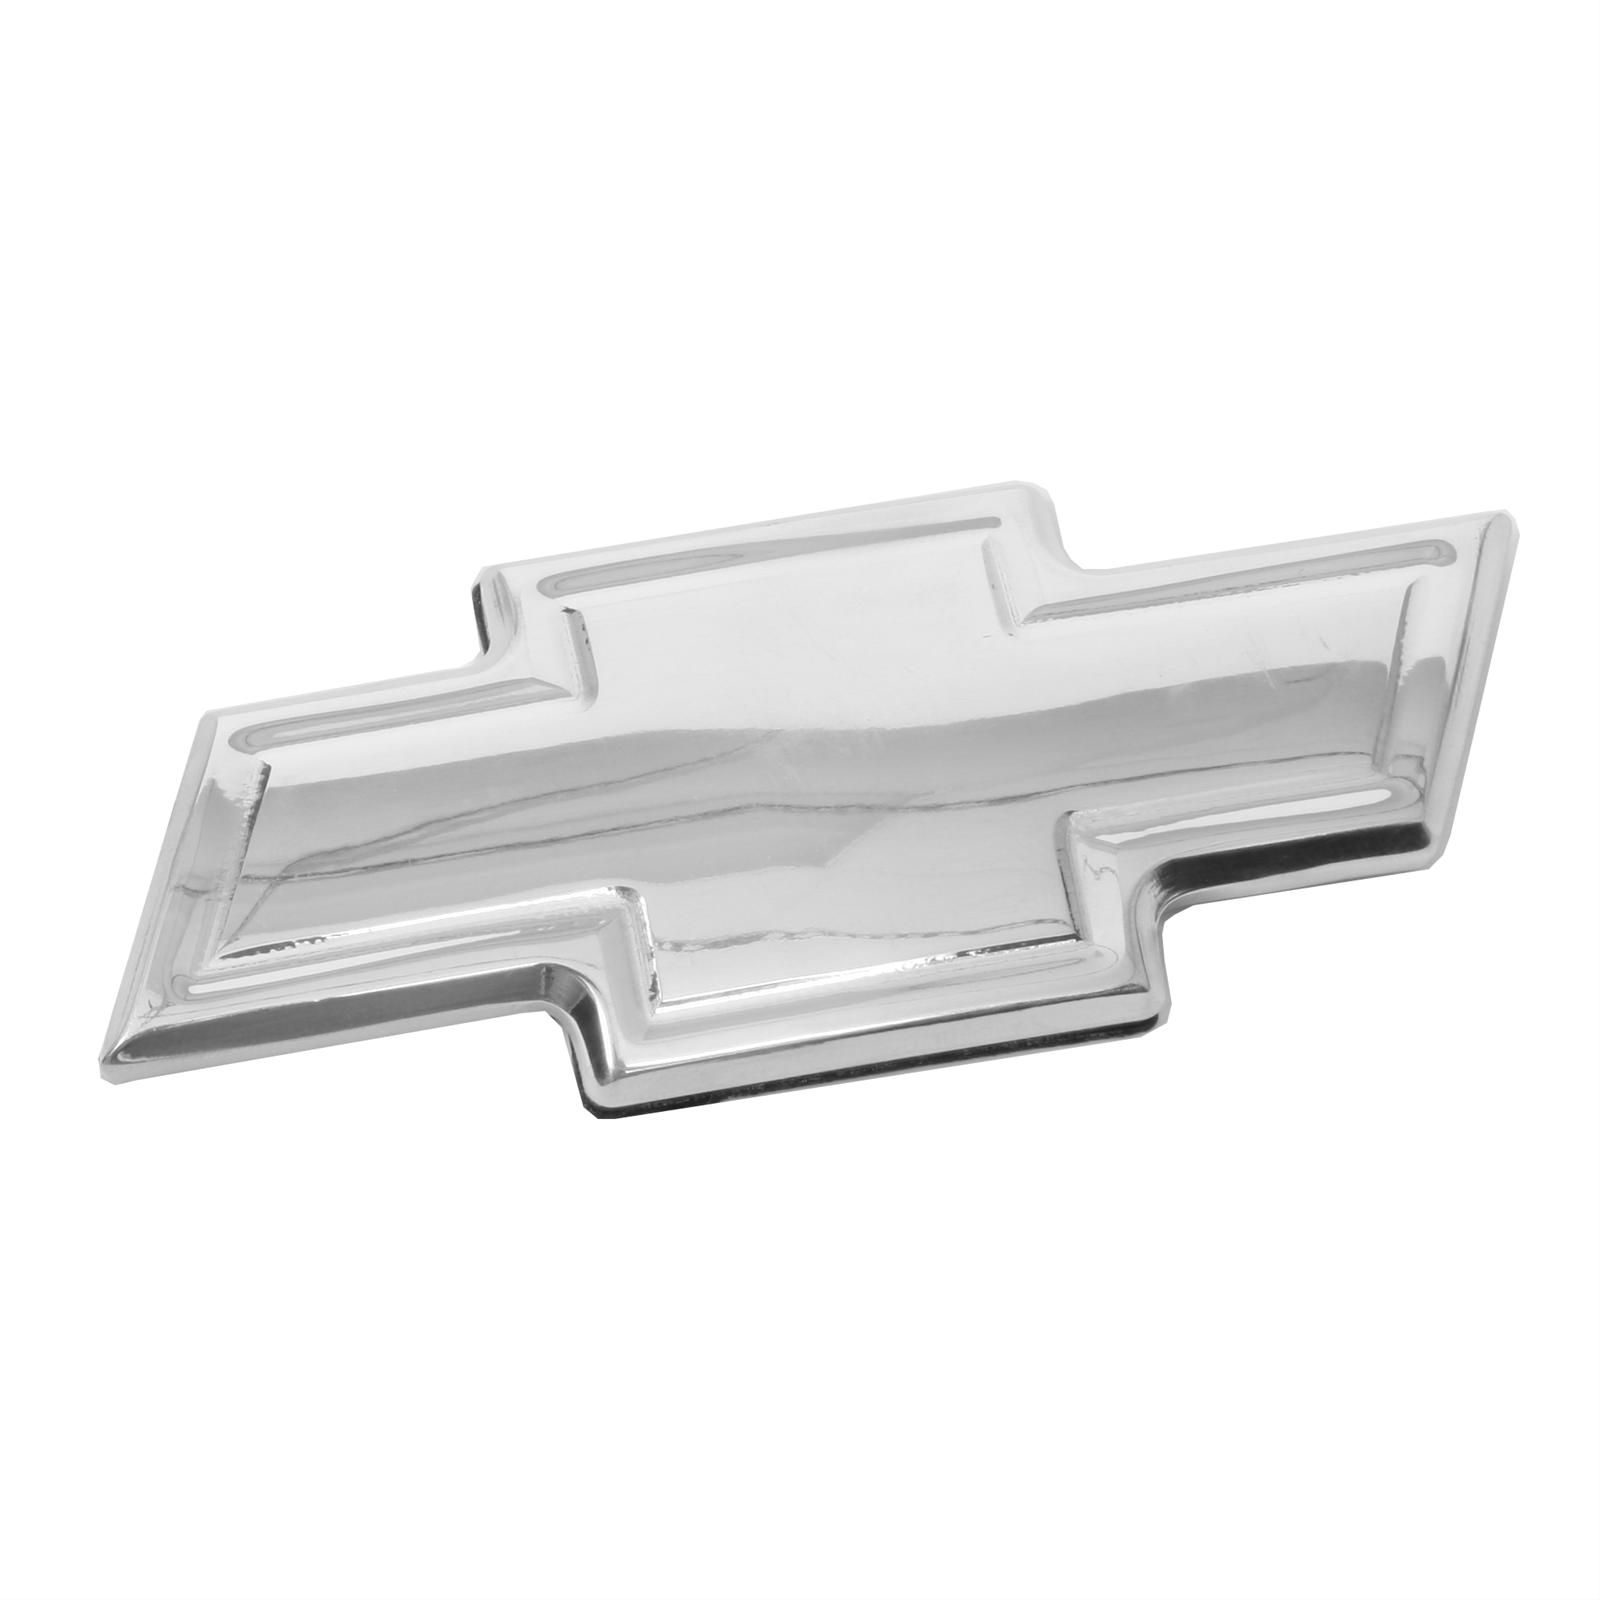 Street Scene Grille Gear Bowties 950 83075 Free Shipping On Orders Over 99 At Summit Racing